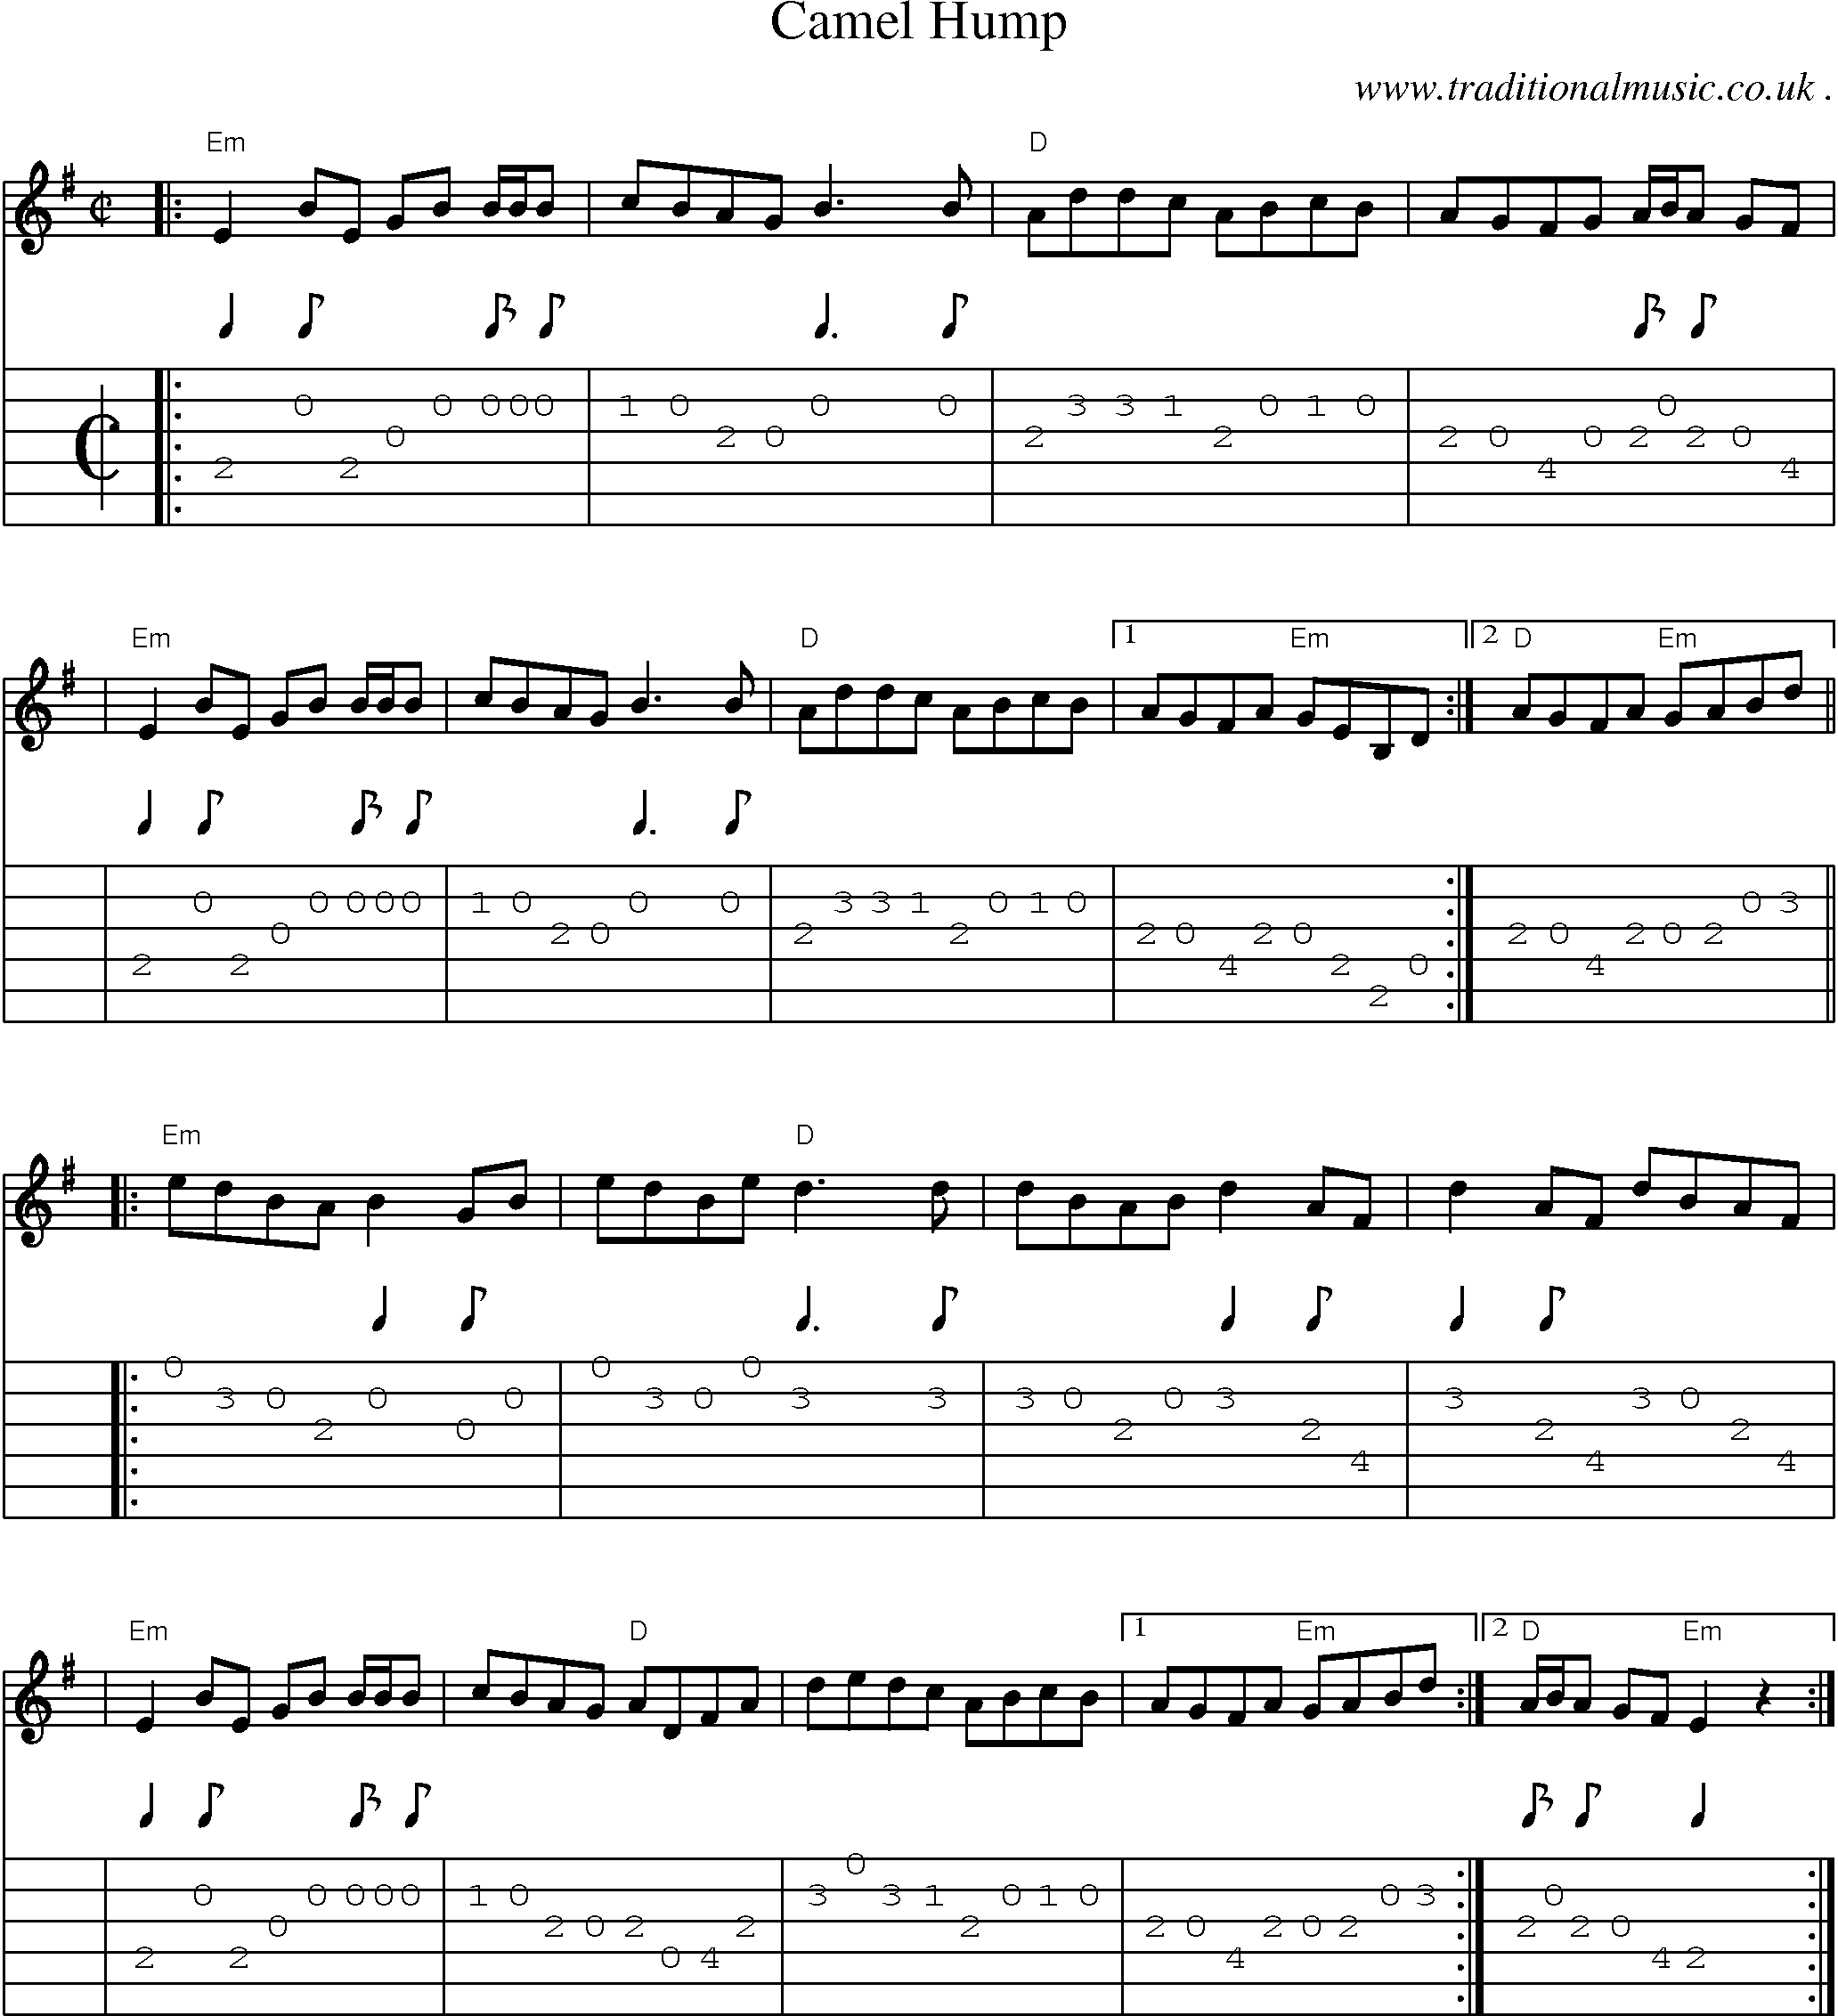 Sheet-music  score, Chords and Guitar Tabs for Camel Hump